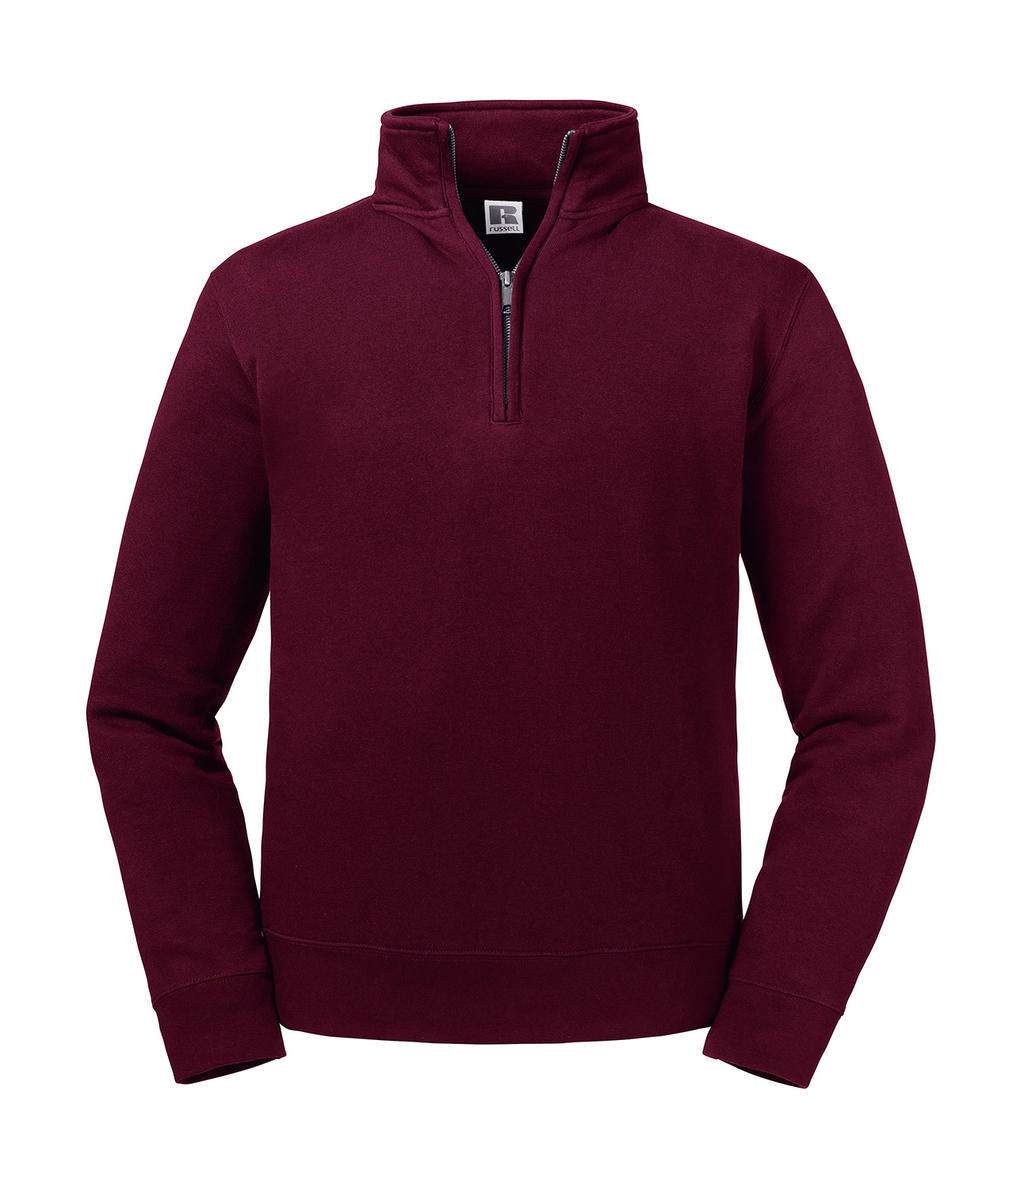  Authentic 1/4 Zip Sweat in Farbe Burgundy